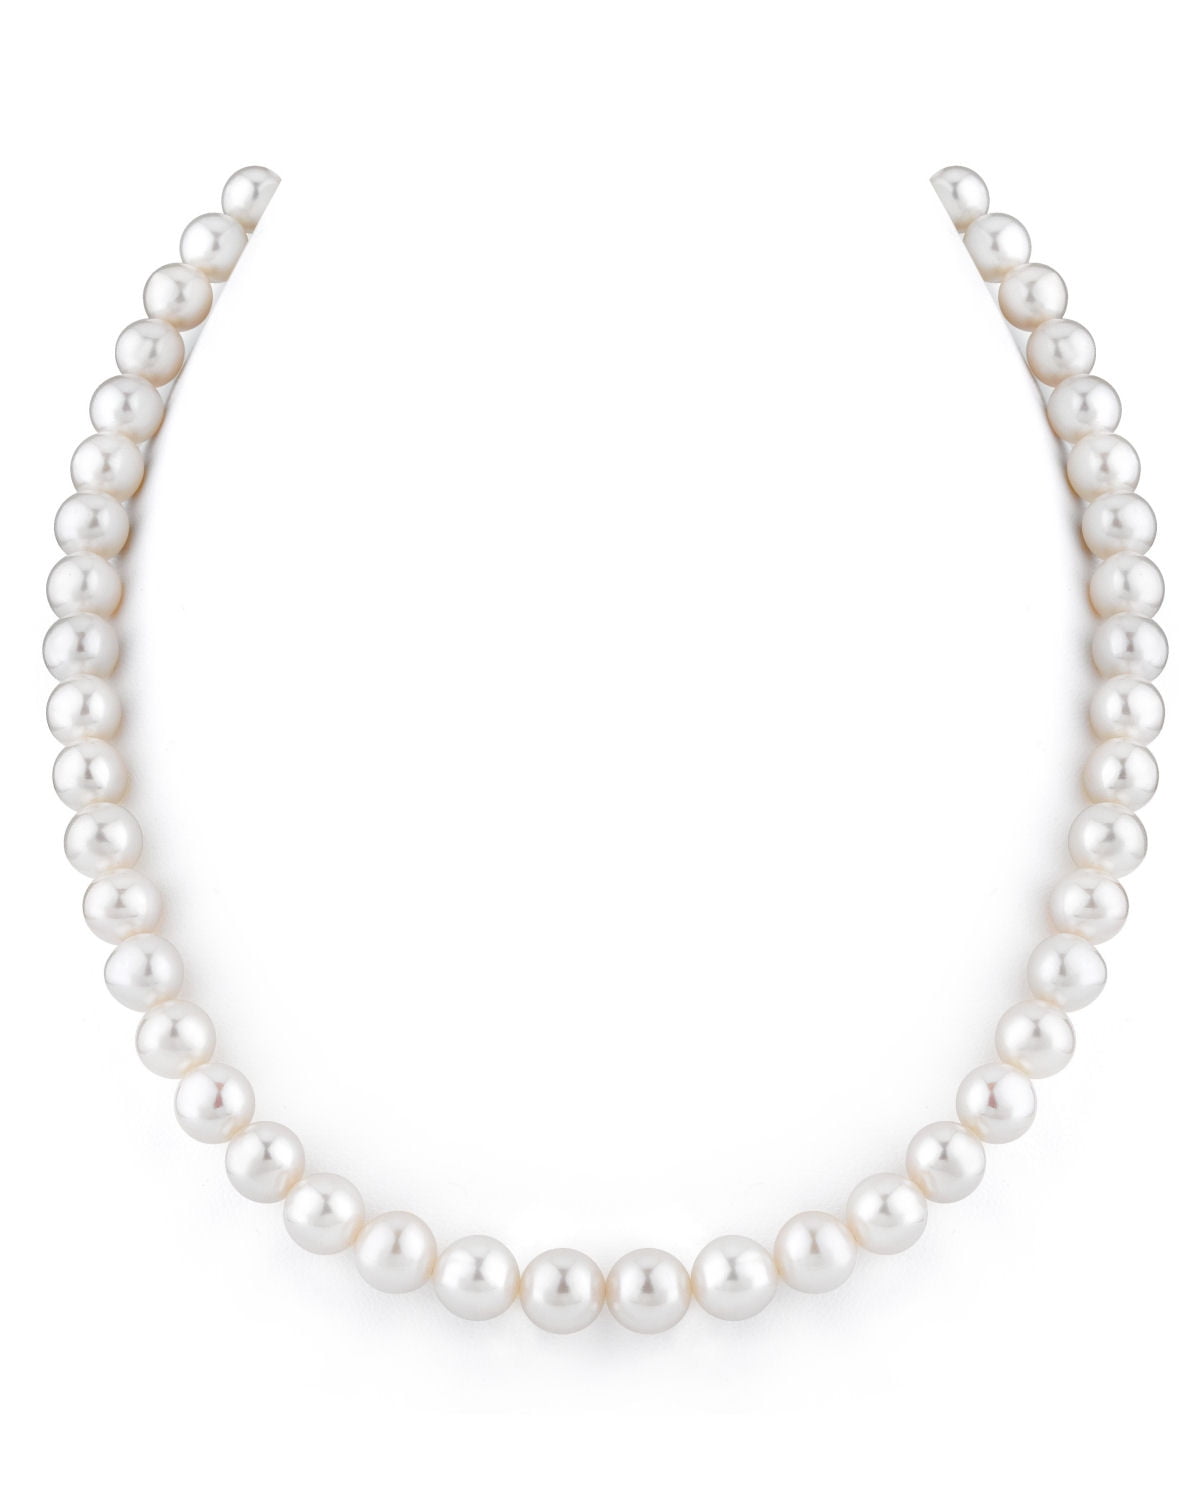 Genuine AAAAA 8-9mm WHITE south sea Real PEARL NECKLACE 18"